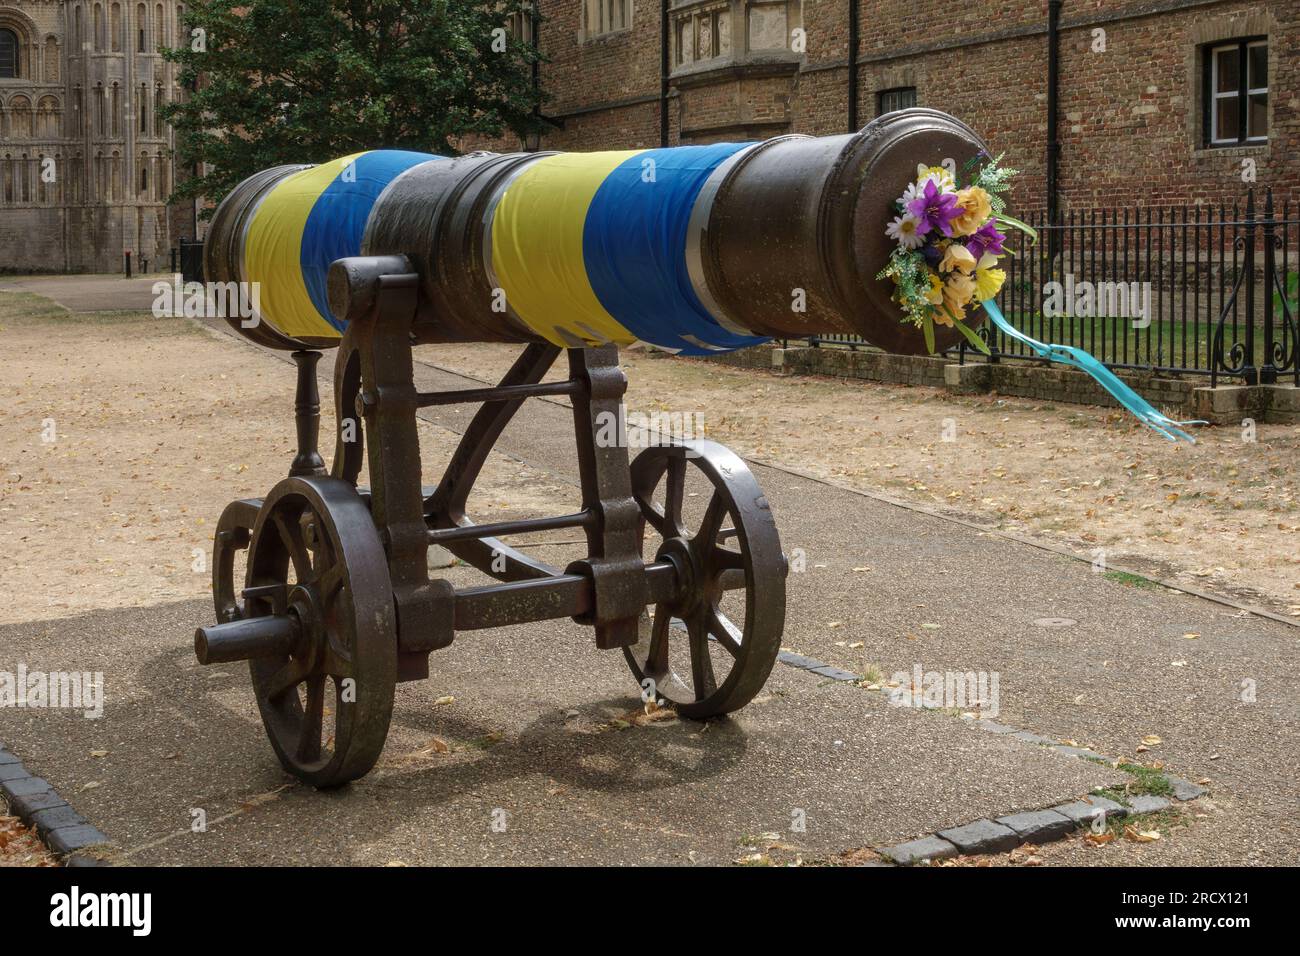 An antique iron cannon wrapped in the Ukrainian National flag with a symbolic bouquet of flowers in the barrel, in the forecourt of Ely Cathedral Stock Photo